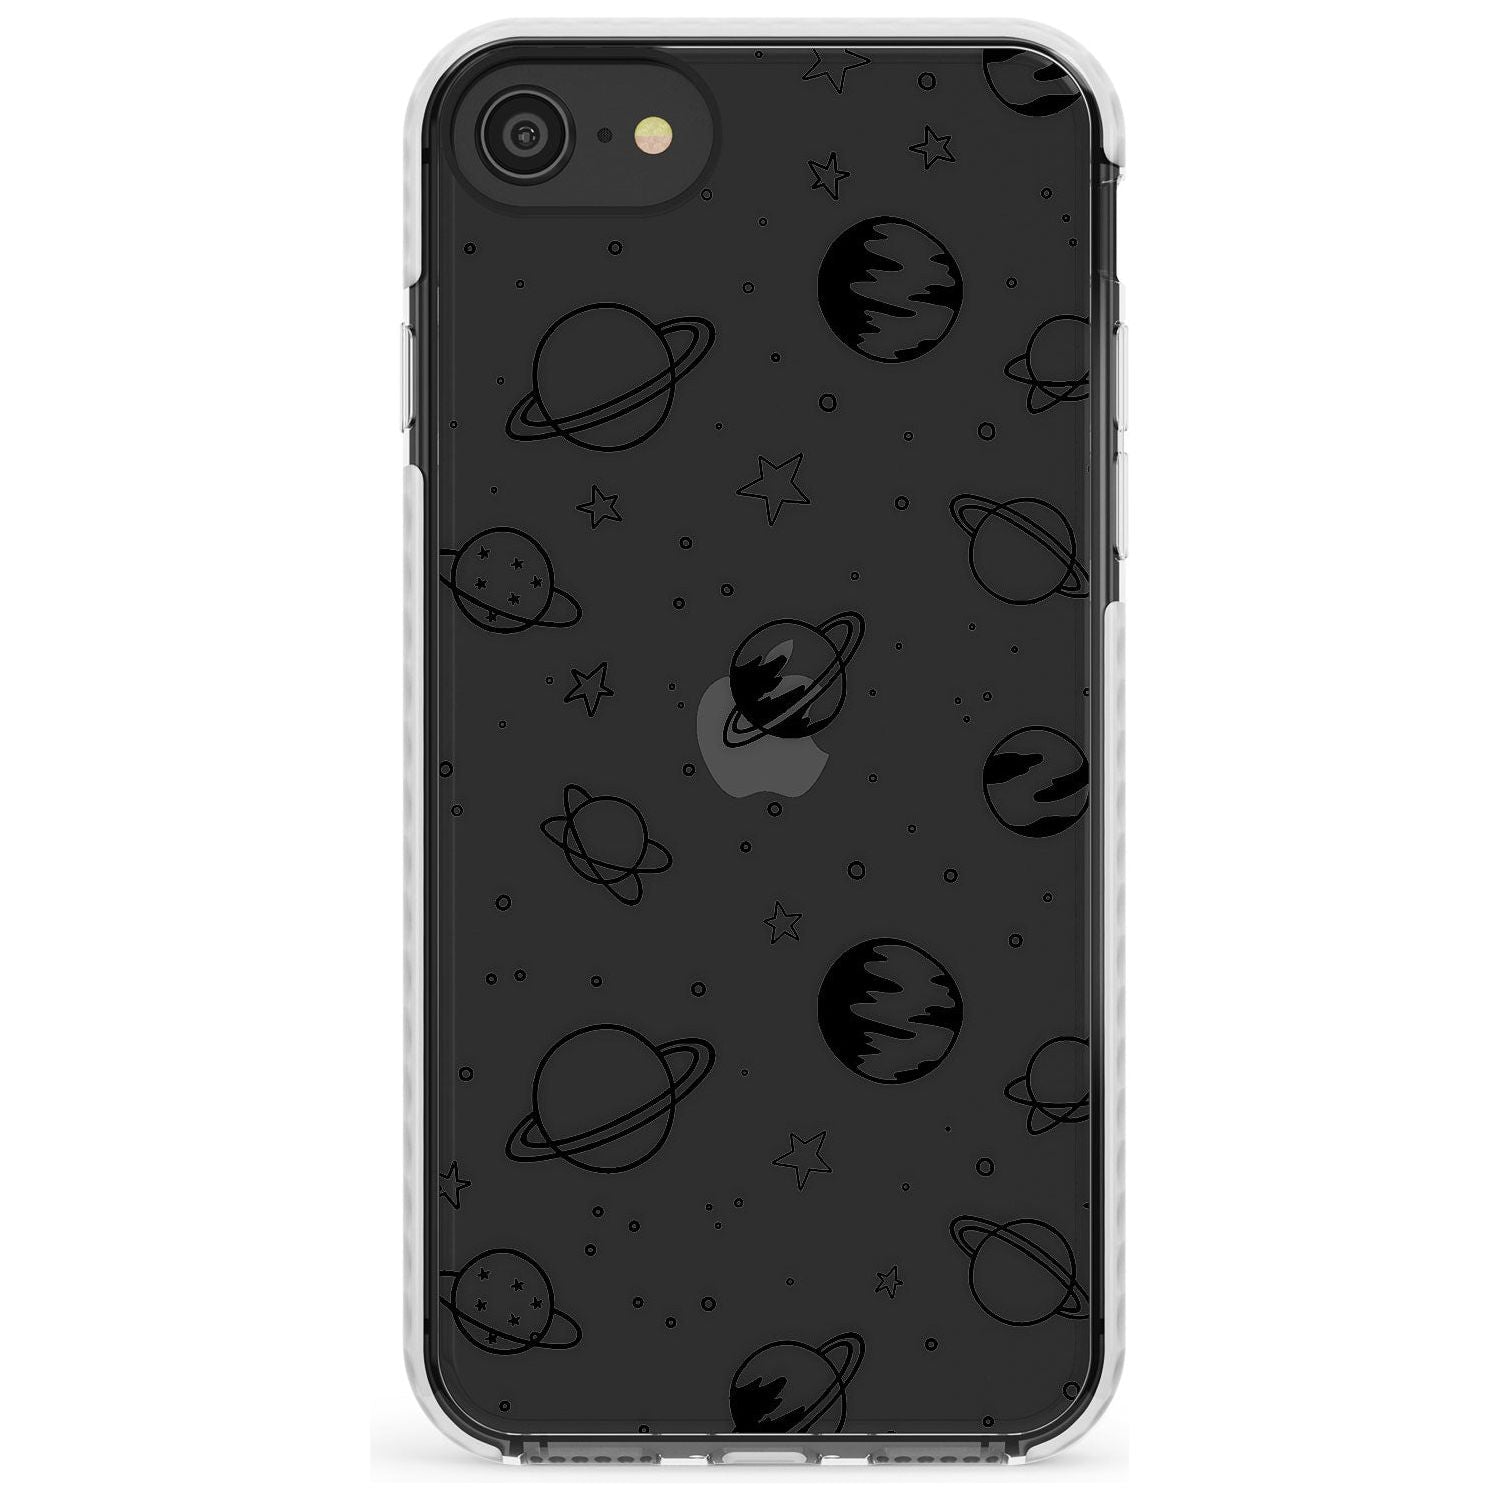 Outer Space Outlines: Black on Clear Slim TPU Phone Case for iPhone SE 8 7 Plus